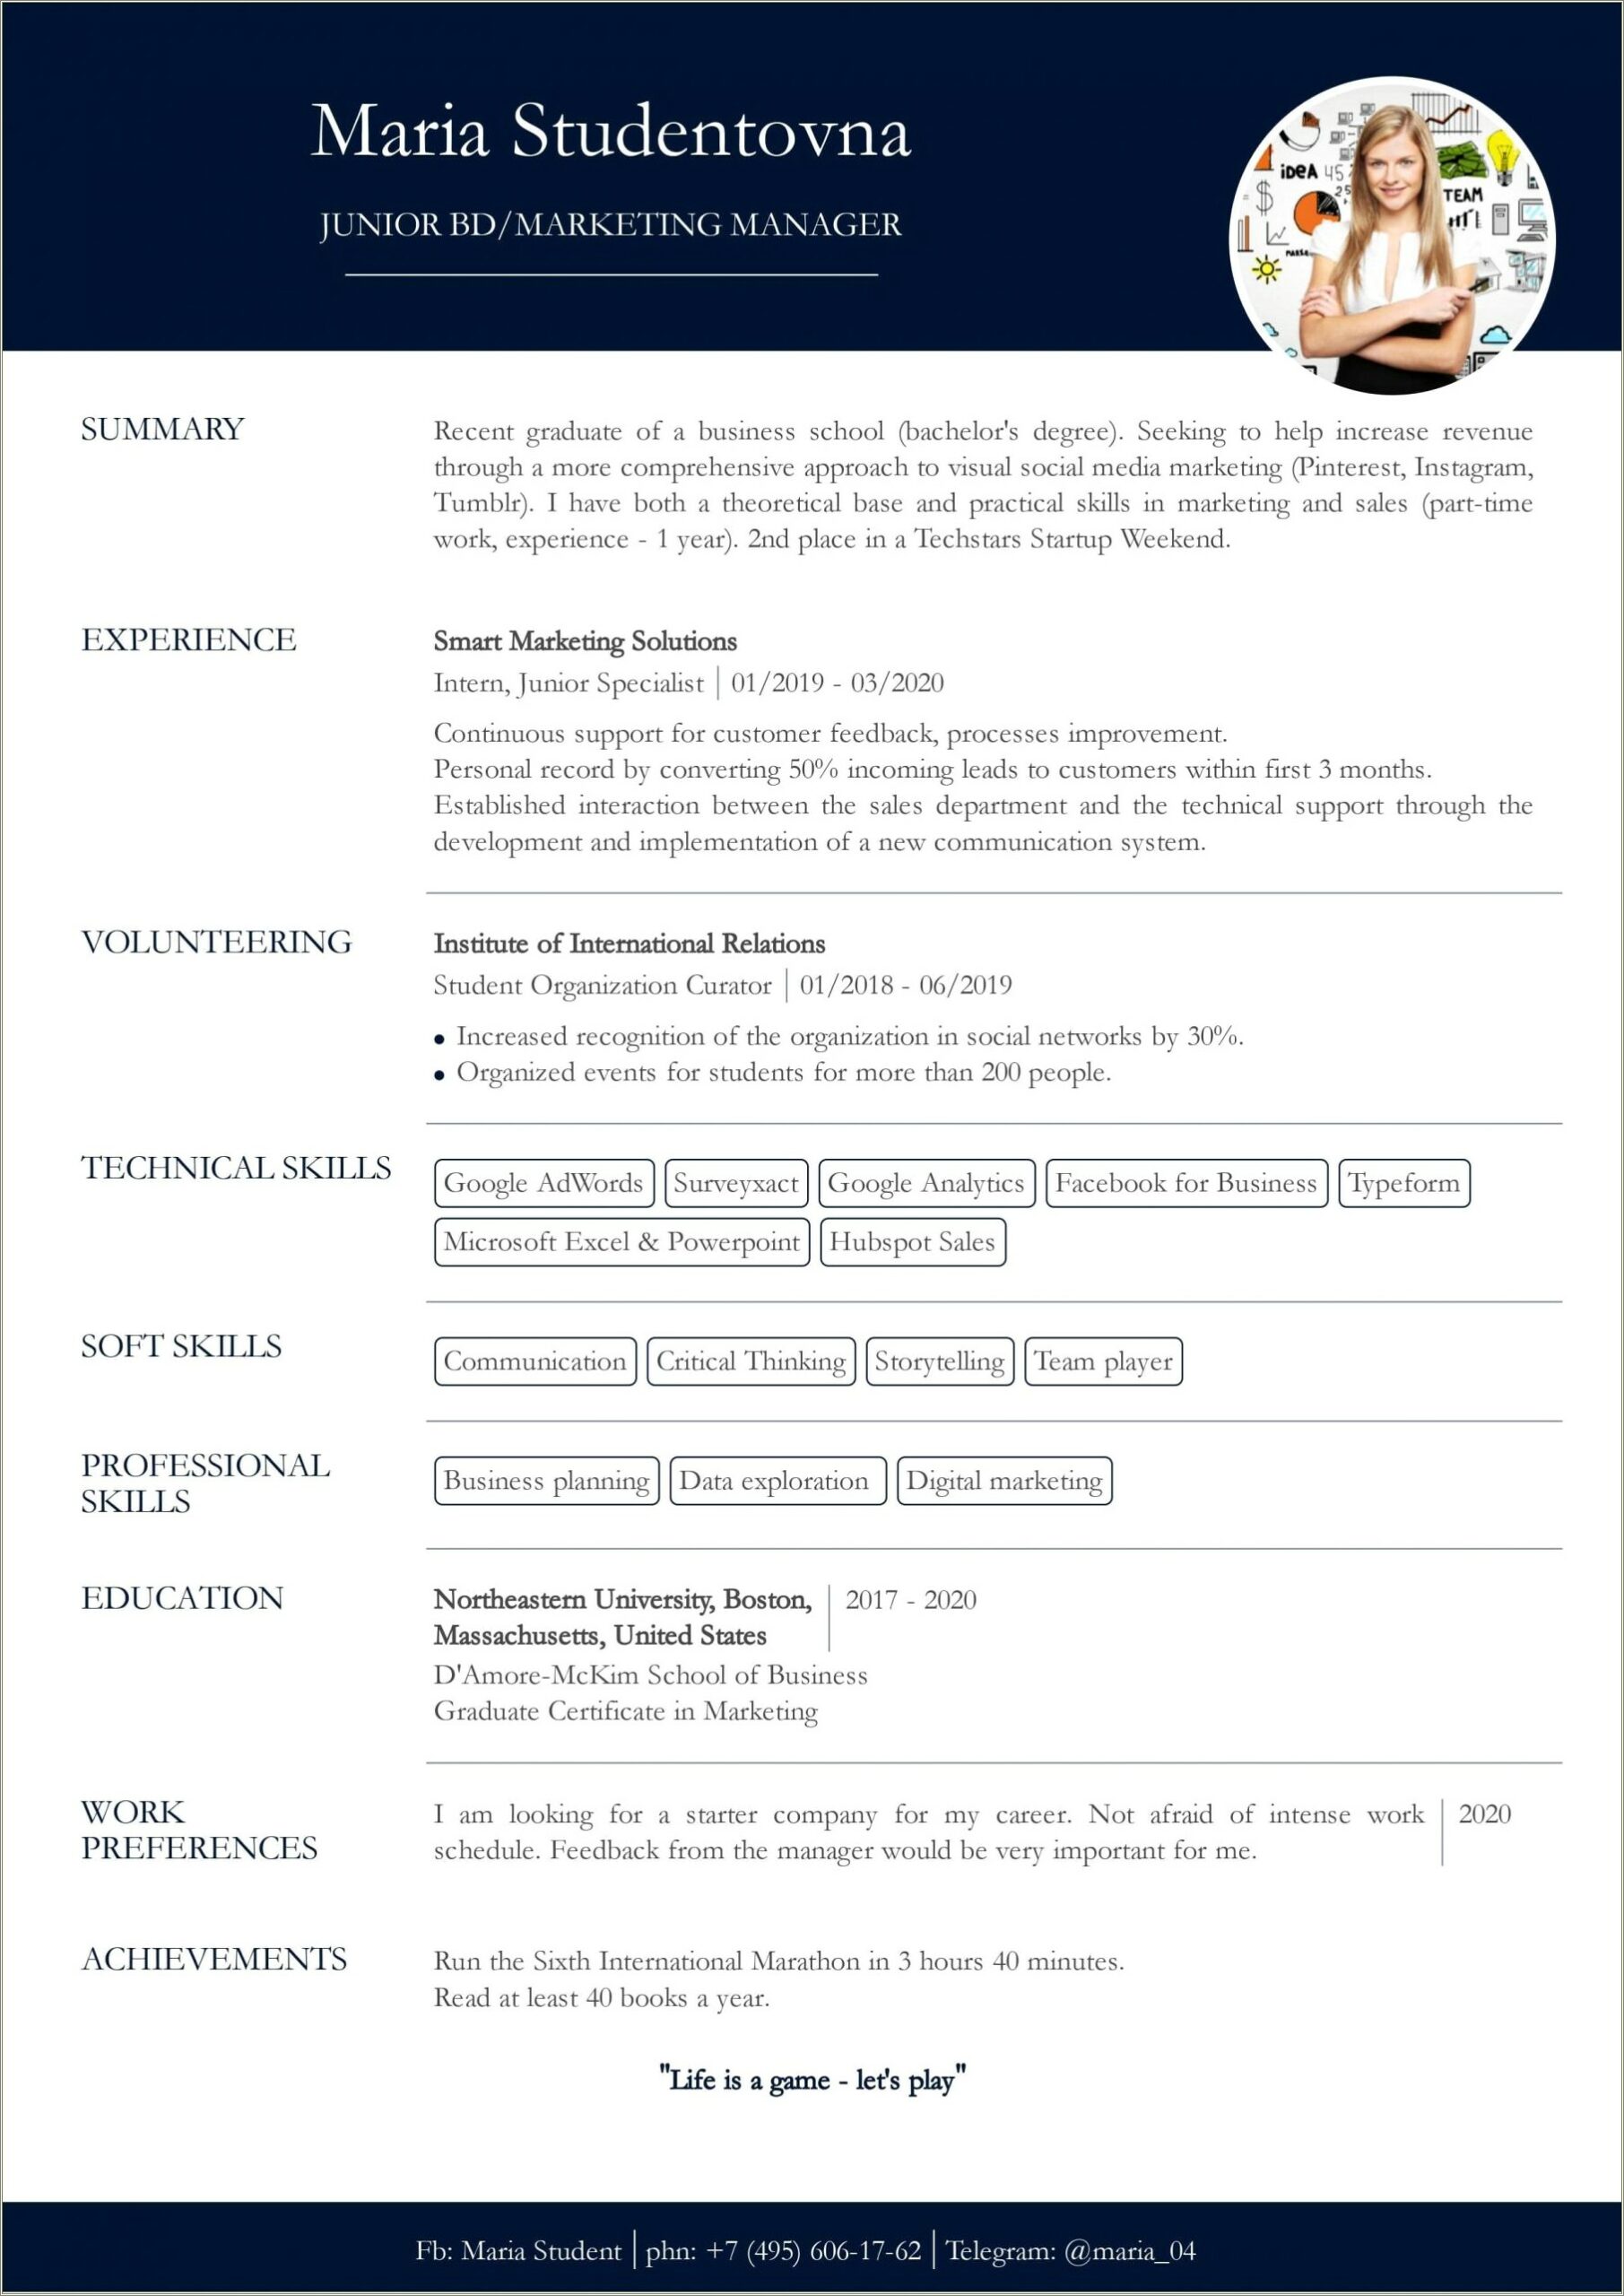 Example Resume For Someone With No Job Experience